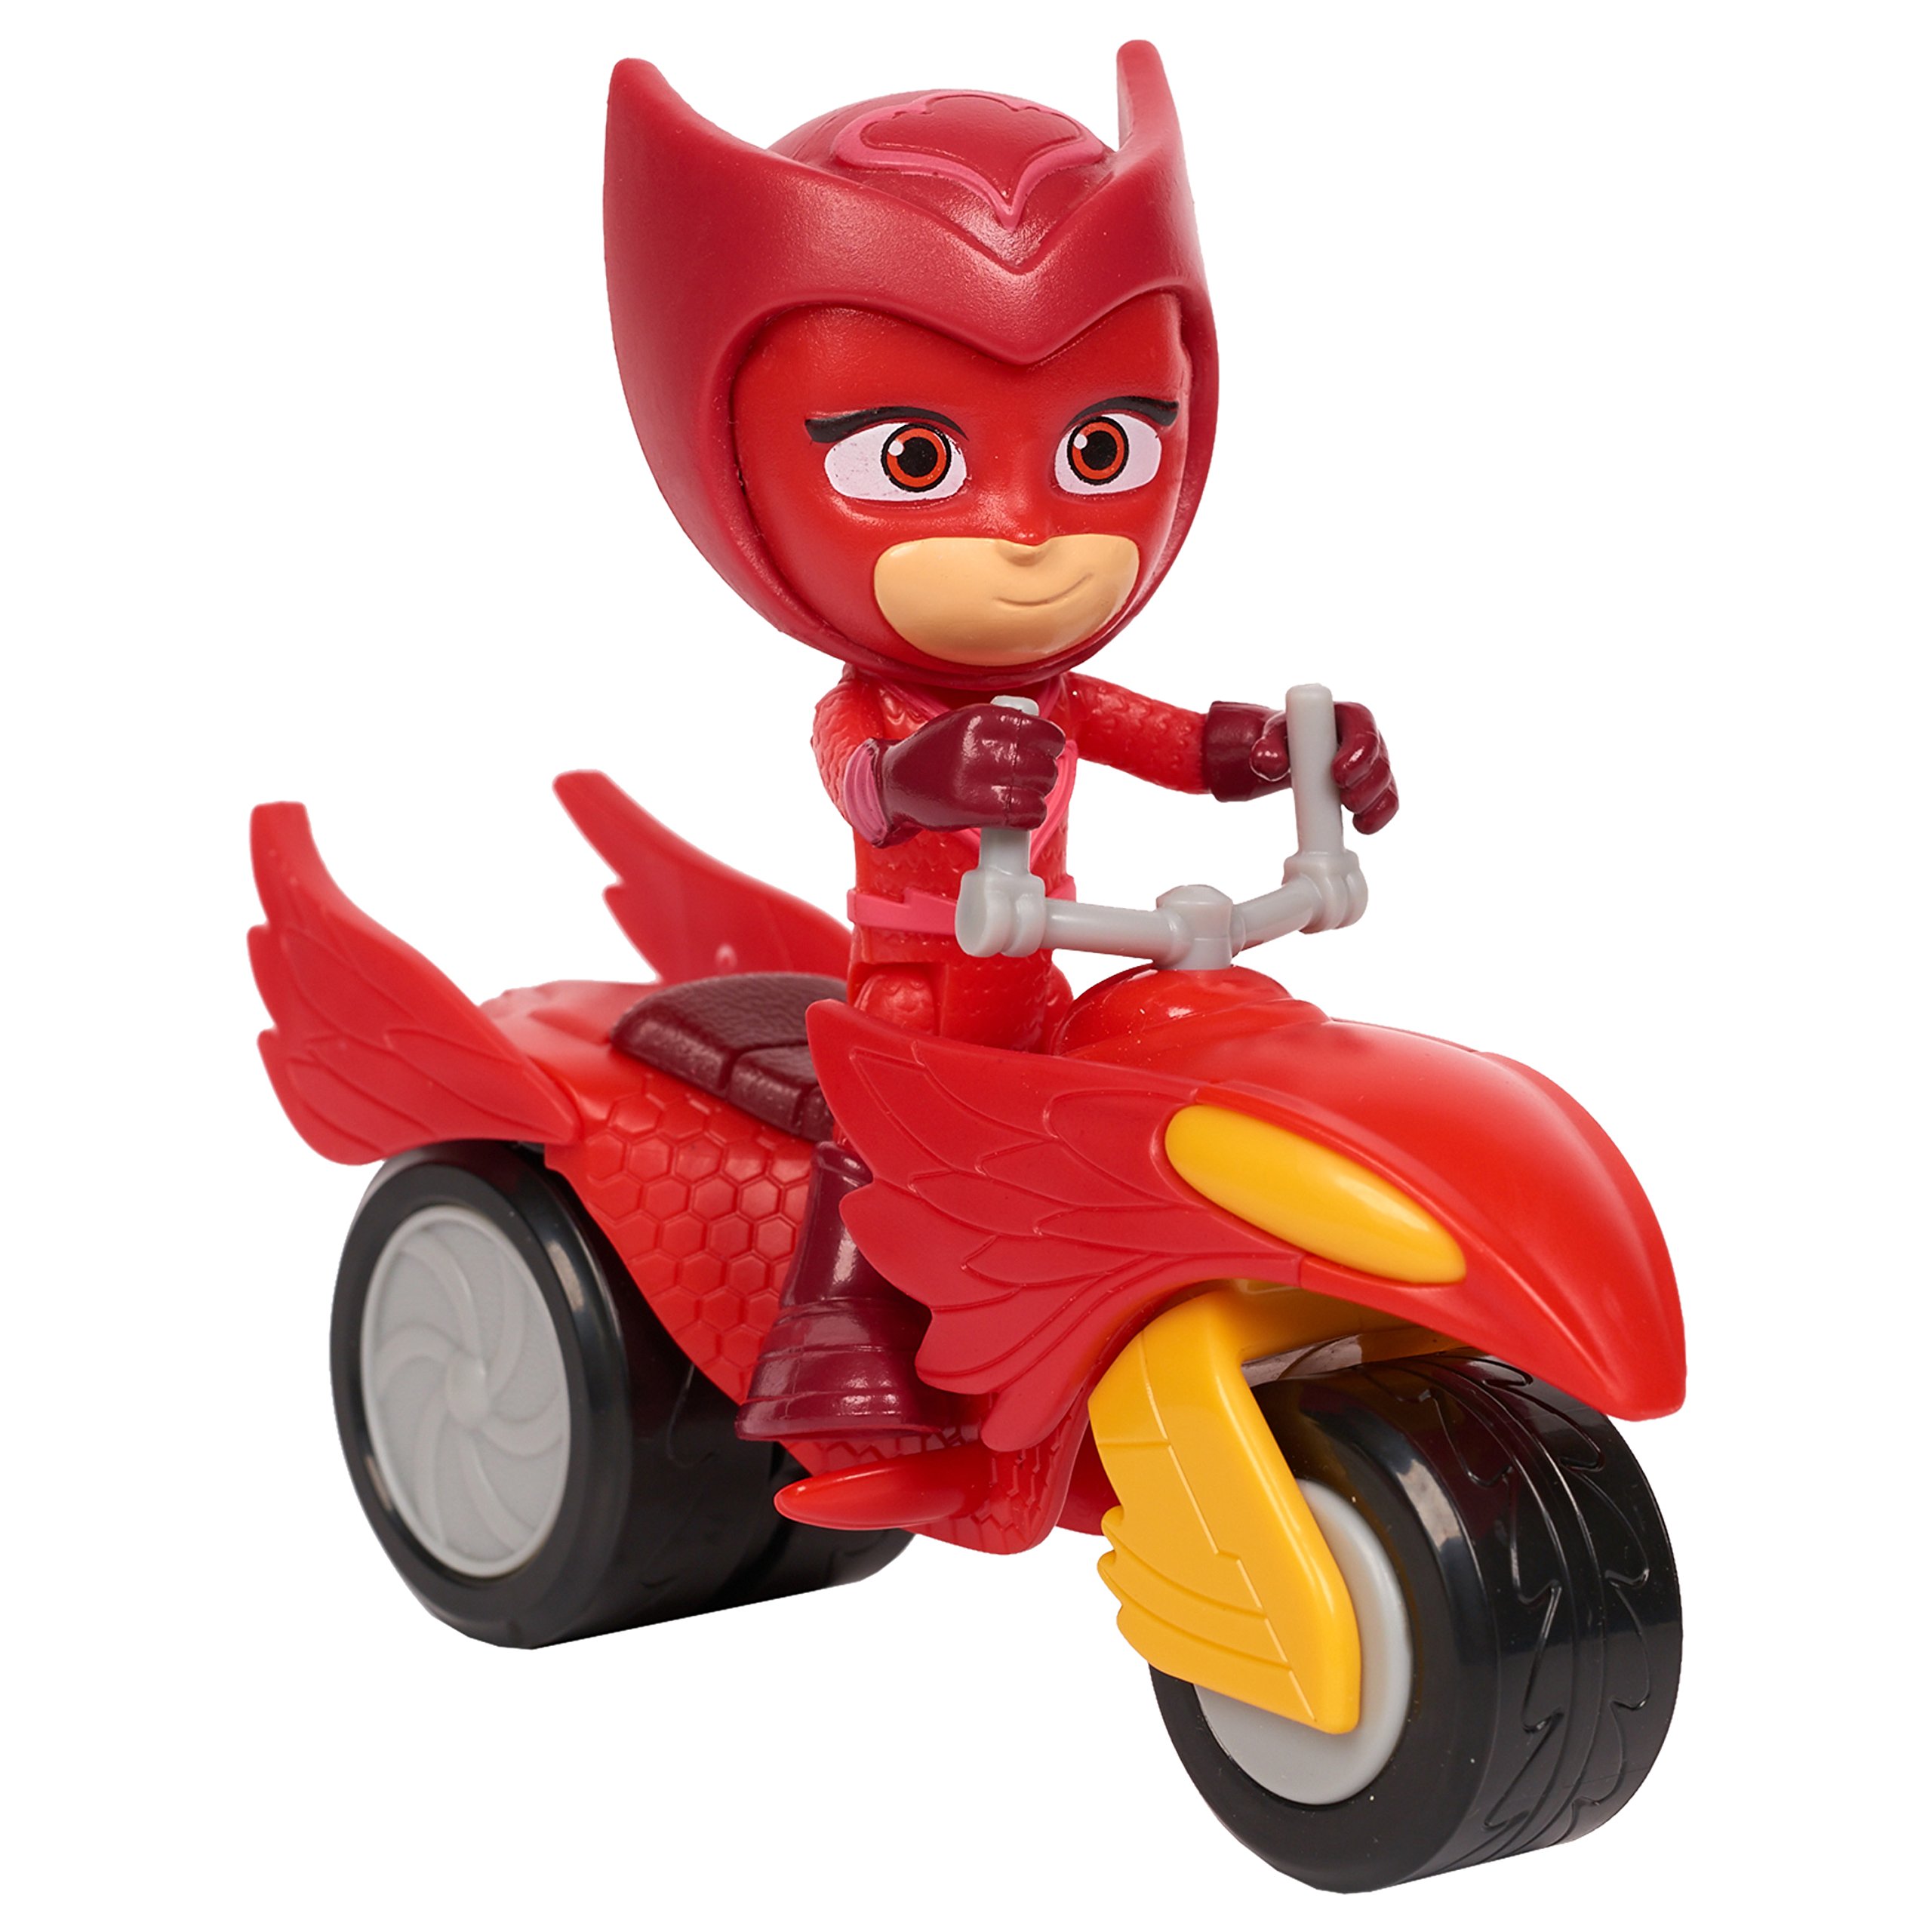 PJ Masks Super Moon Adventure Space Rover, Owlette, Kids Toys for Ages 3 Up, Gifts and Presents by Just Play